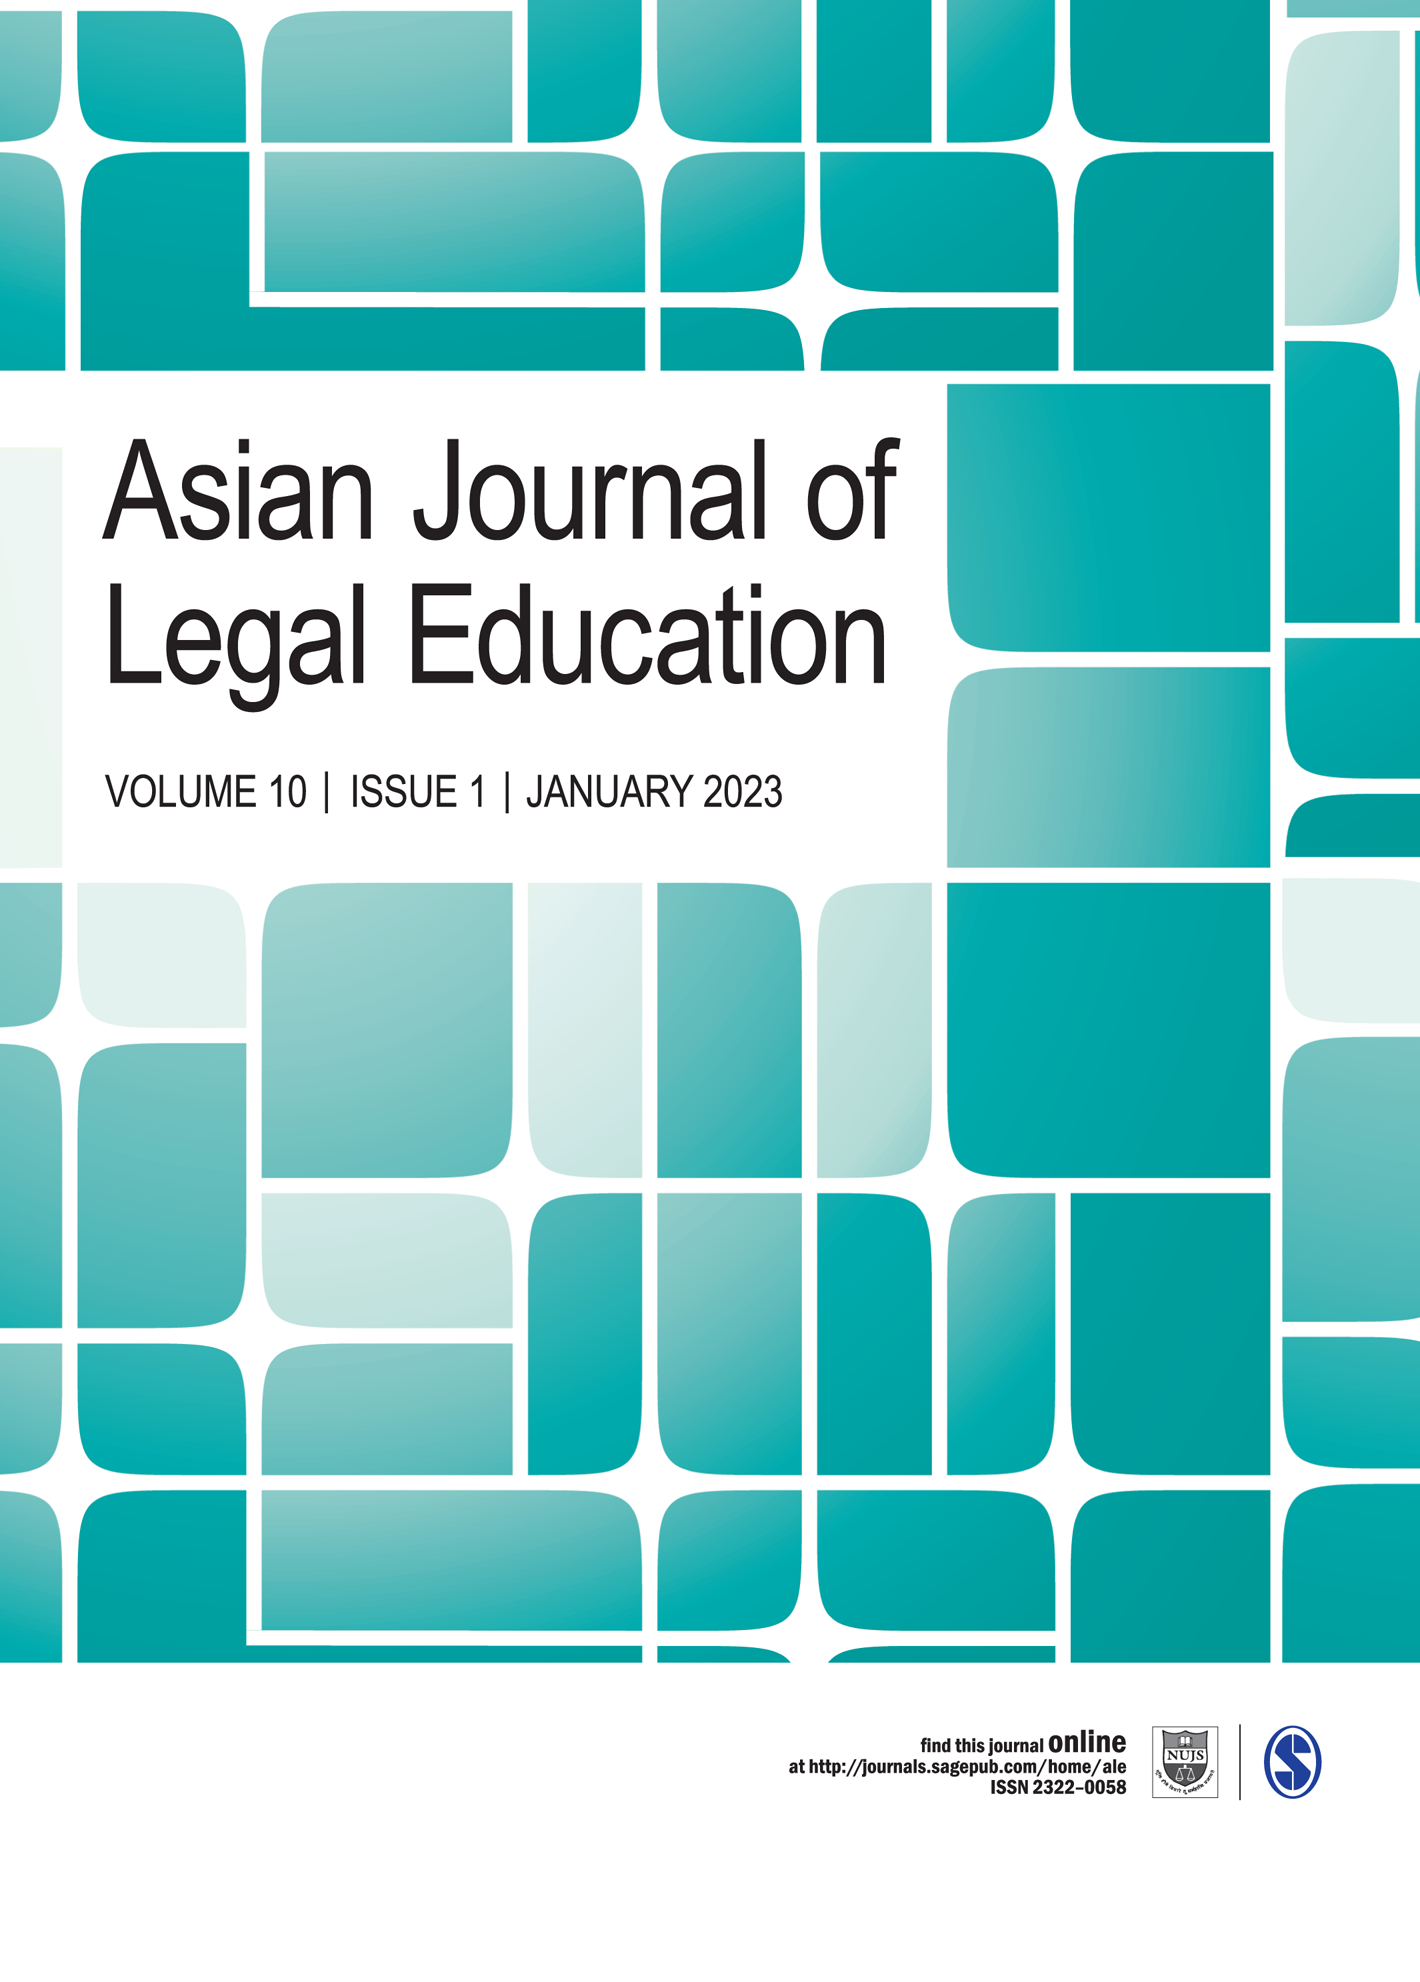 Asian journal of legal education.